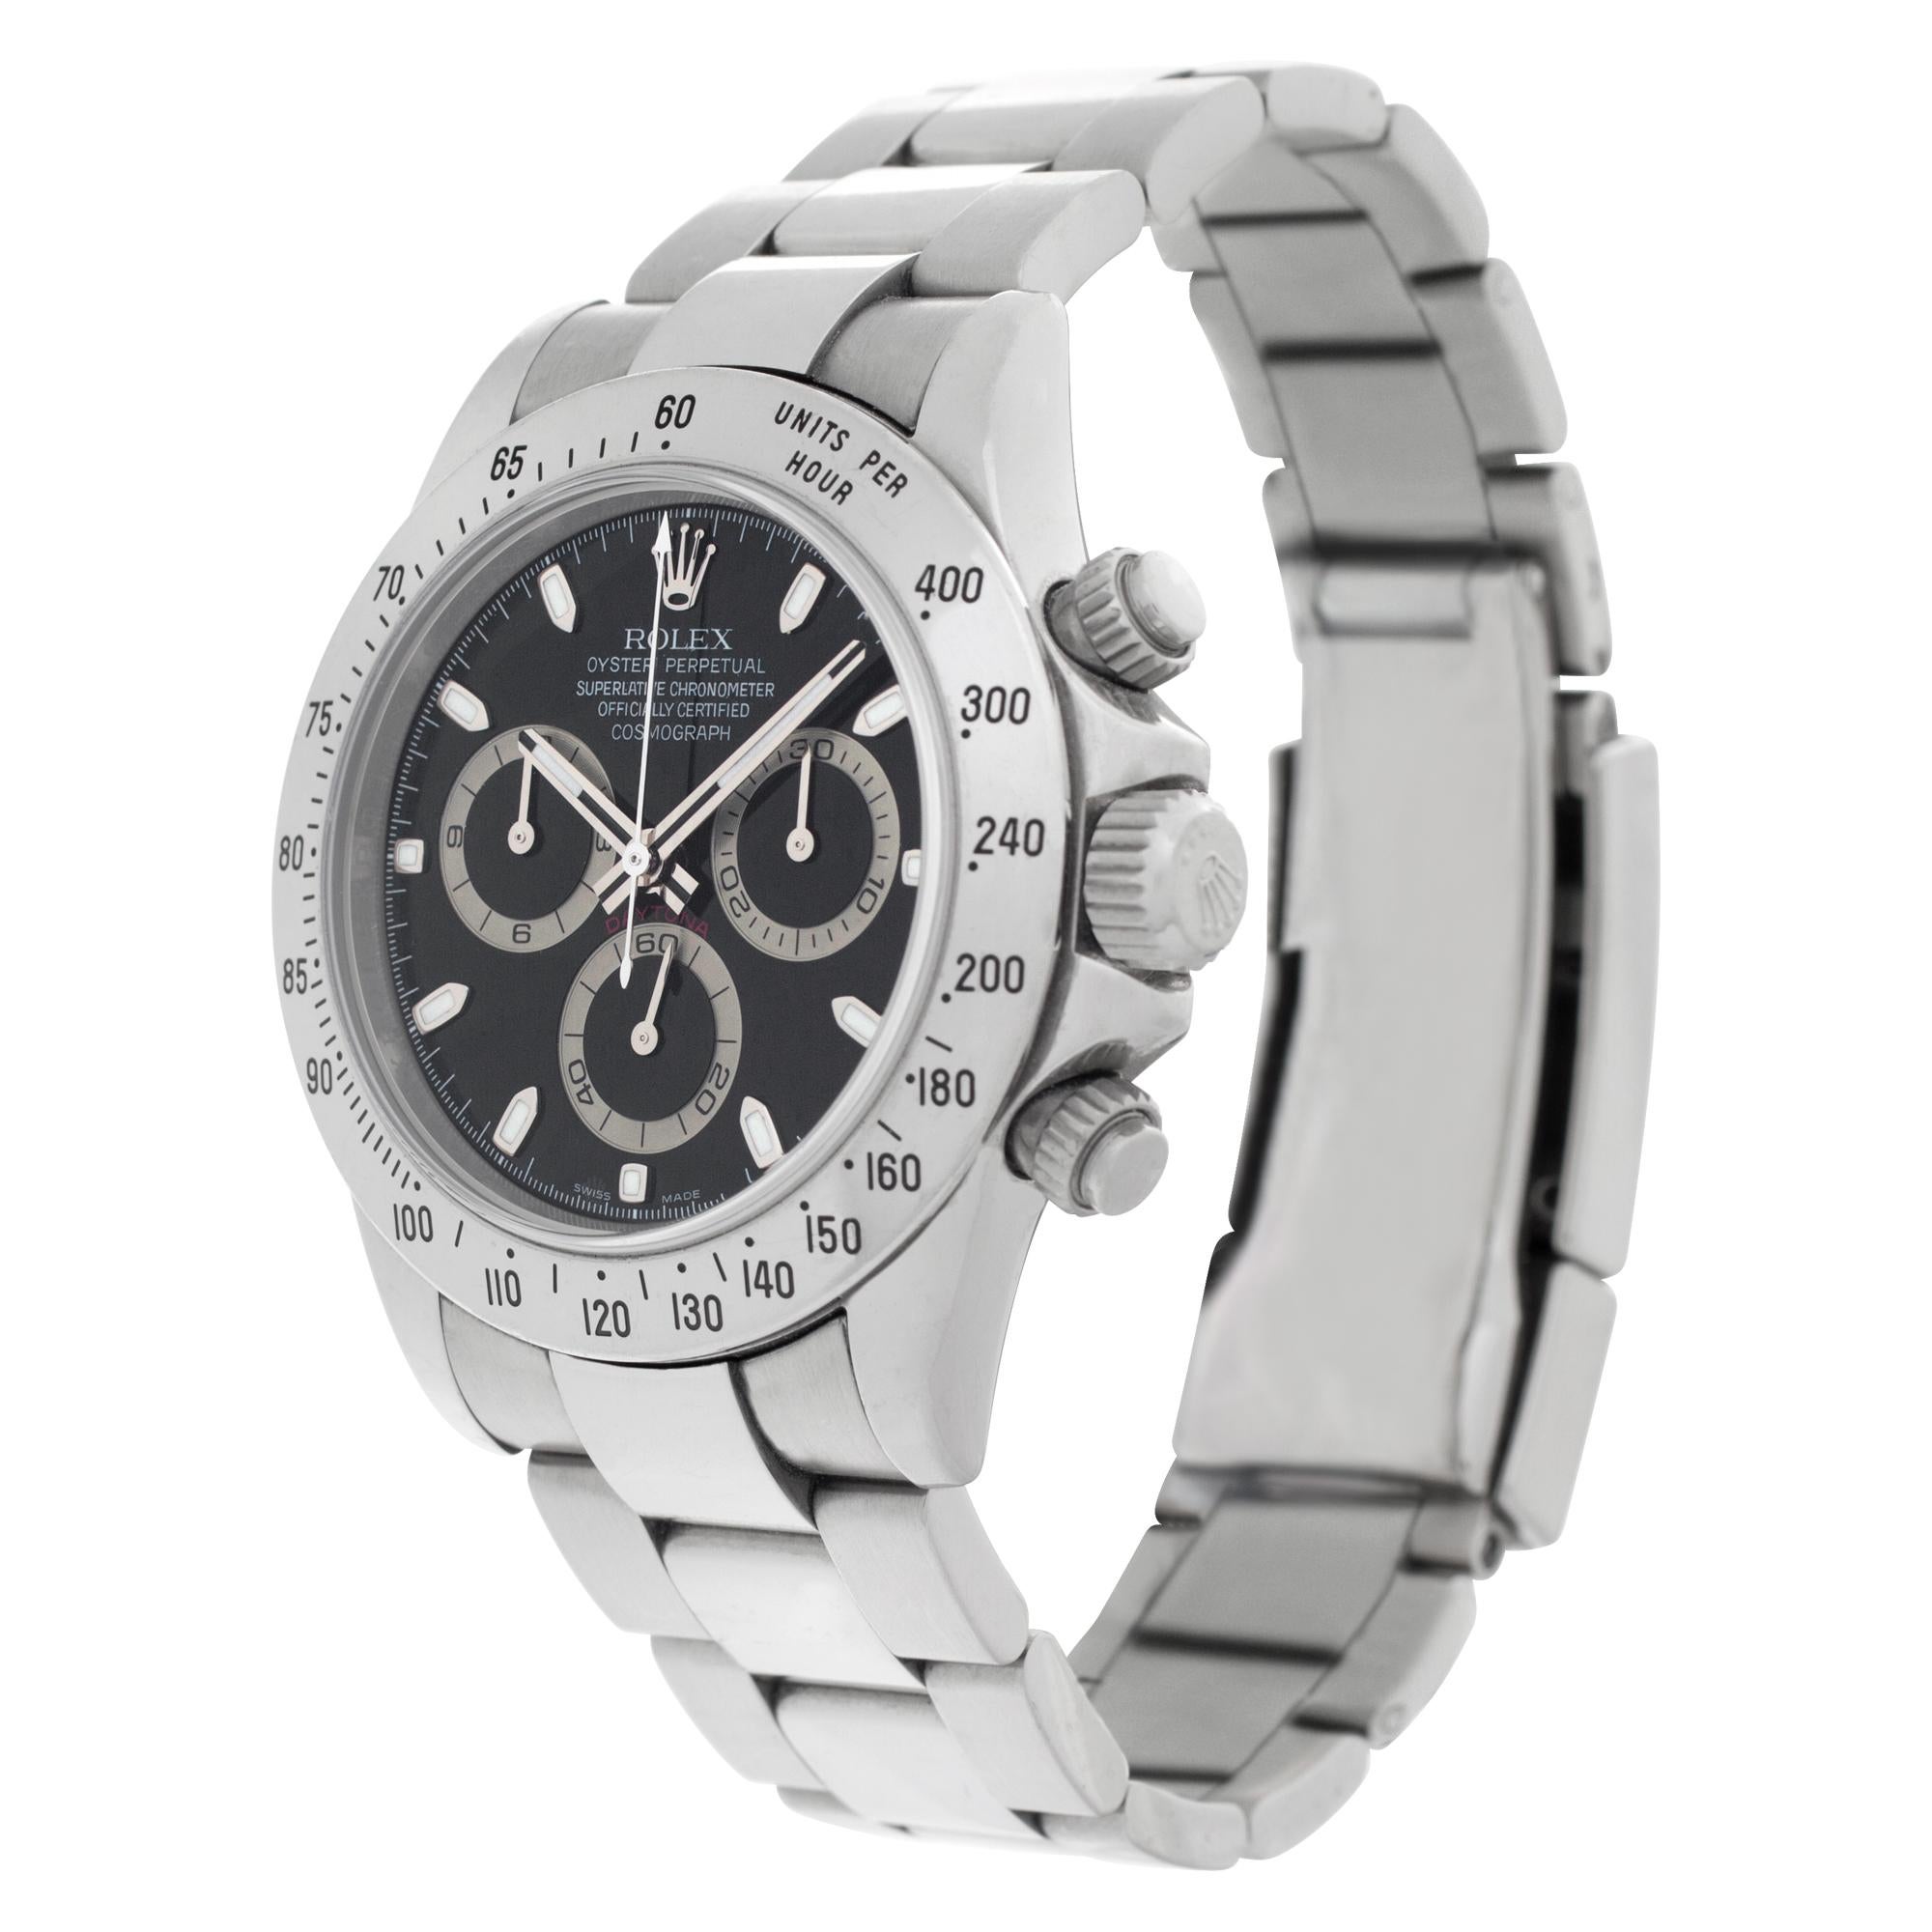 Rolex Daytona in stainless steel. Auto w/ subseconds and chronograph. 40 mm case size. With box and papers. **Bank wire only at this price** Ref 116520. Circa 2009. Fine Pre-owned Rolex Watch.

Certified preowned Sport Rolex Daytona 116520 watch is